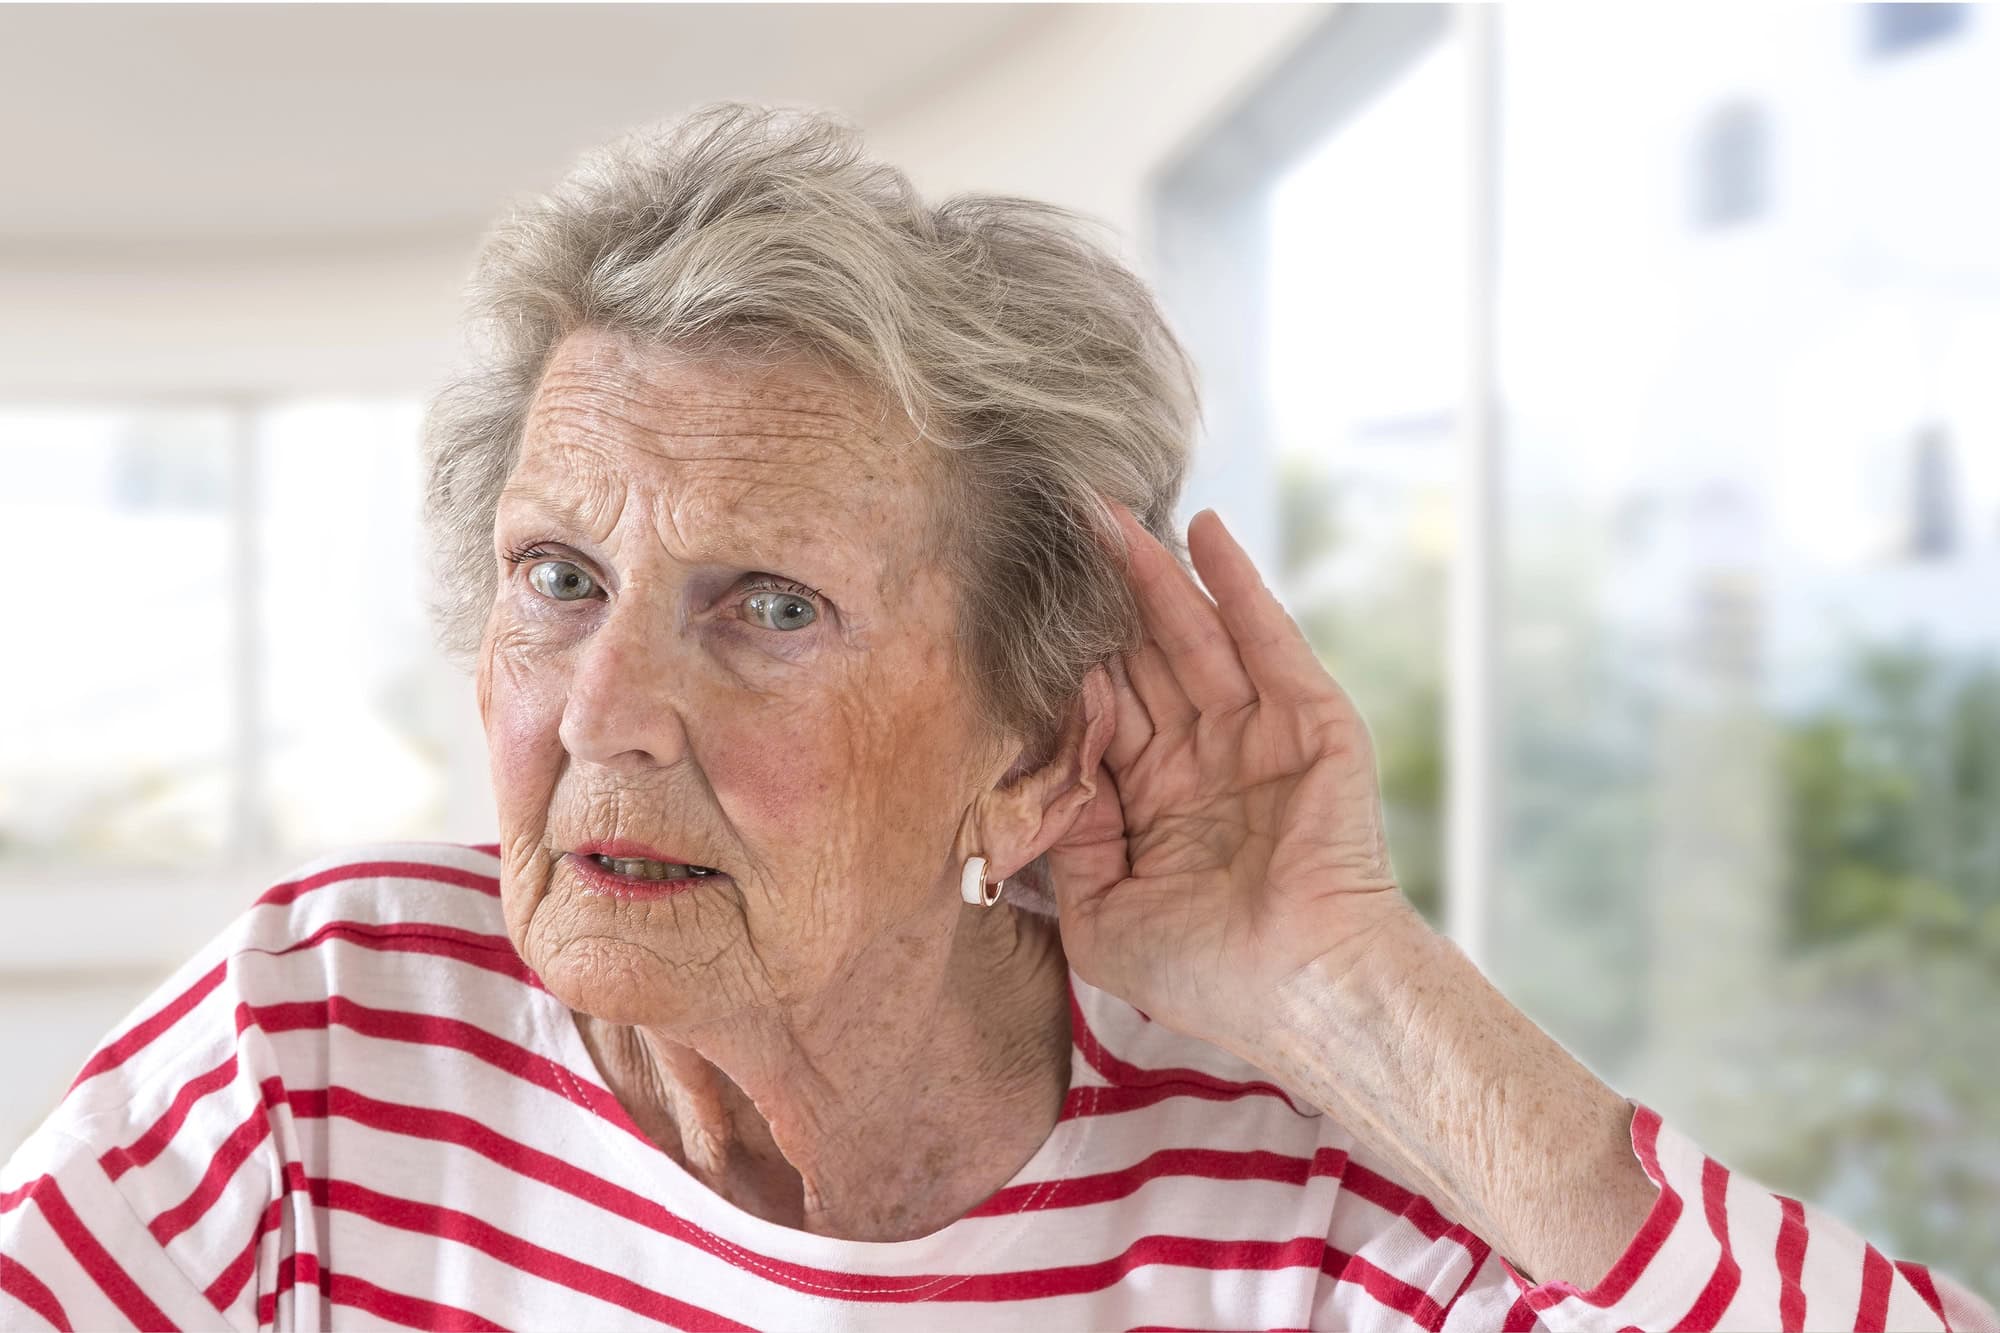 seniors-and-hearing-loss-coping-and-getting-help